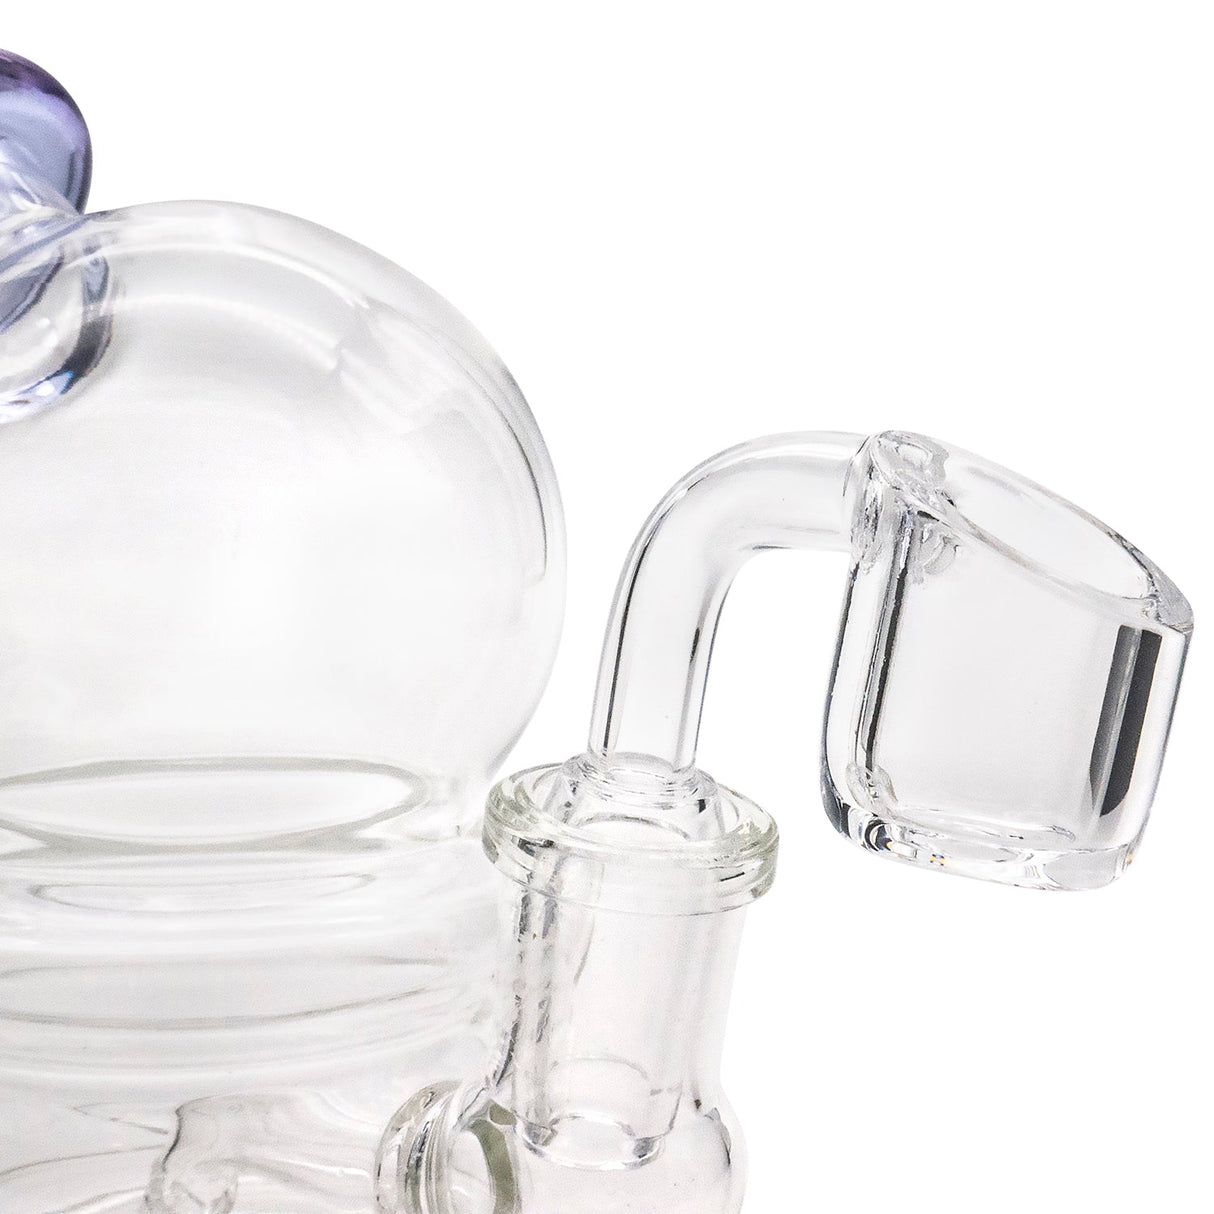 Glassic Compact Globe Banger Hanger Dab Rig close-up, 90 Degree 14mm Female Joint